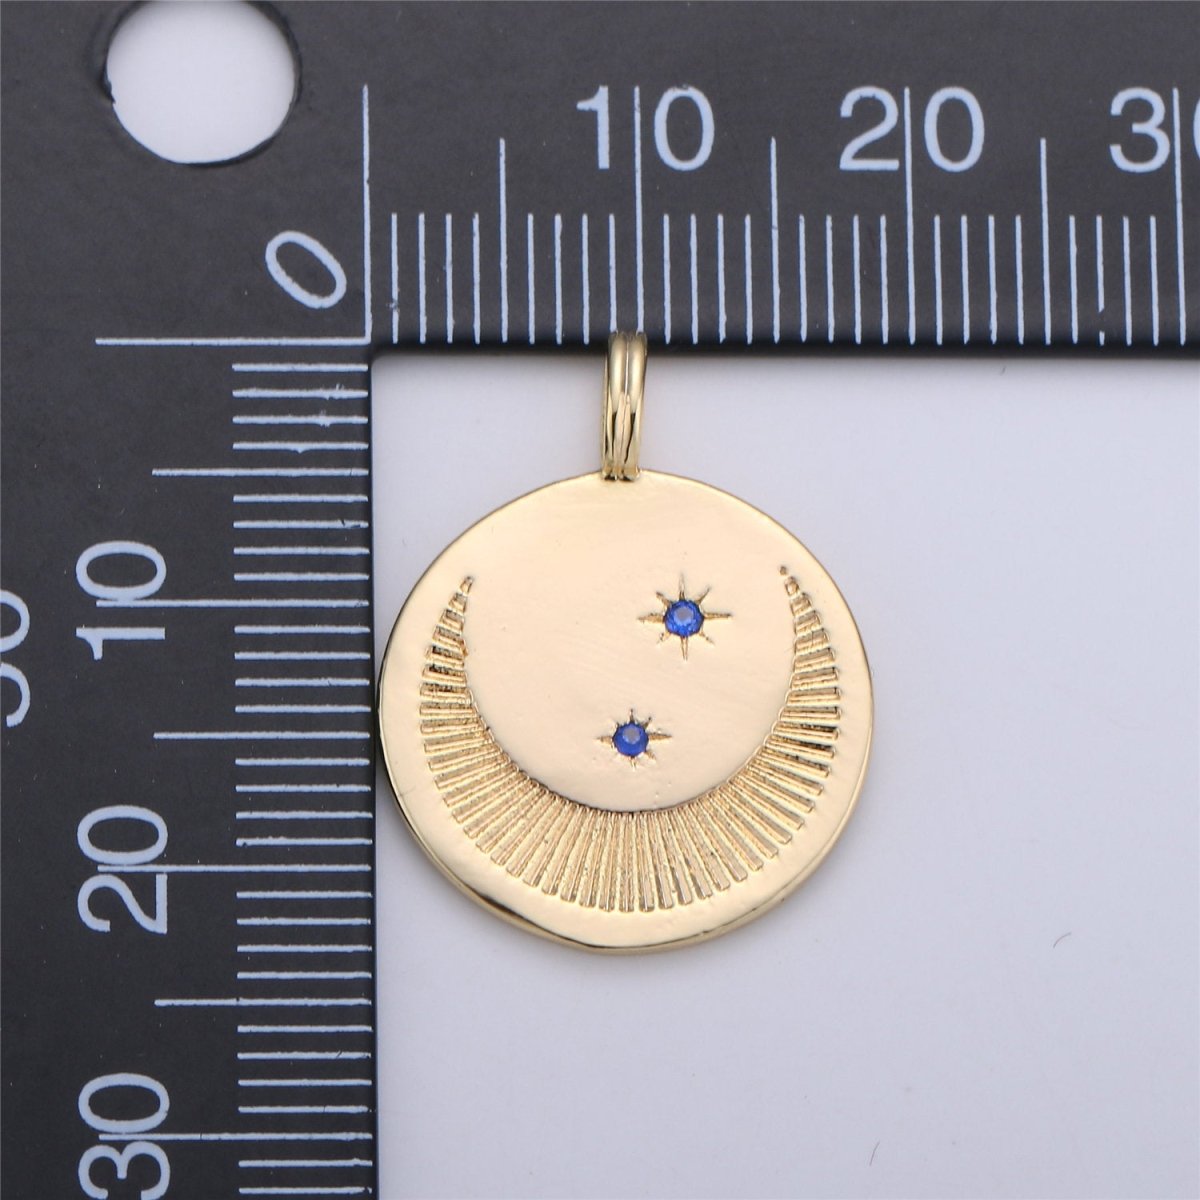 Dainty Gold Moon and Star Medallion Pendant - 18k gold Filled Crescent Moon Round Disc Charm Necklace Pendant C-697 - DLUXCA